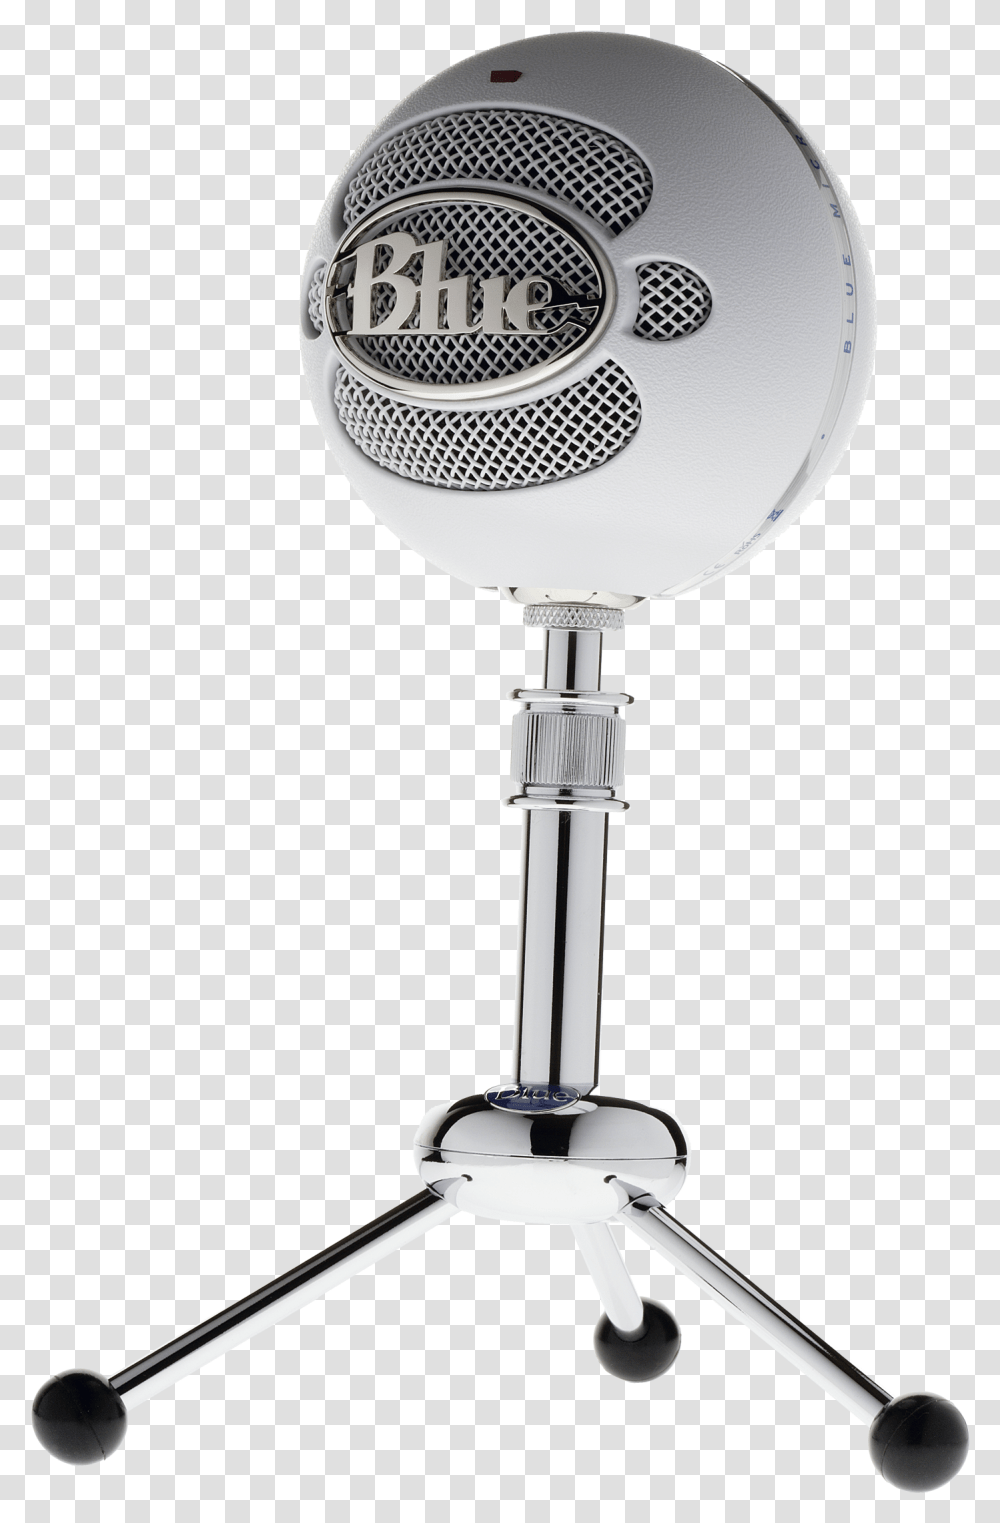 Download Hd Blue Snowball Ice Blue Snowball Microphone, Lamp, Electrical Device Transparent Png